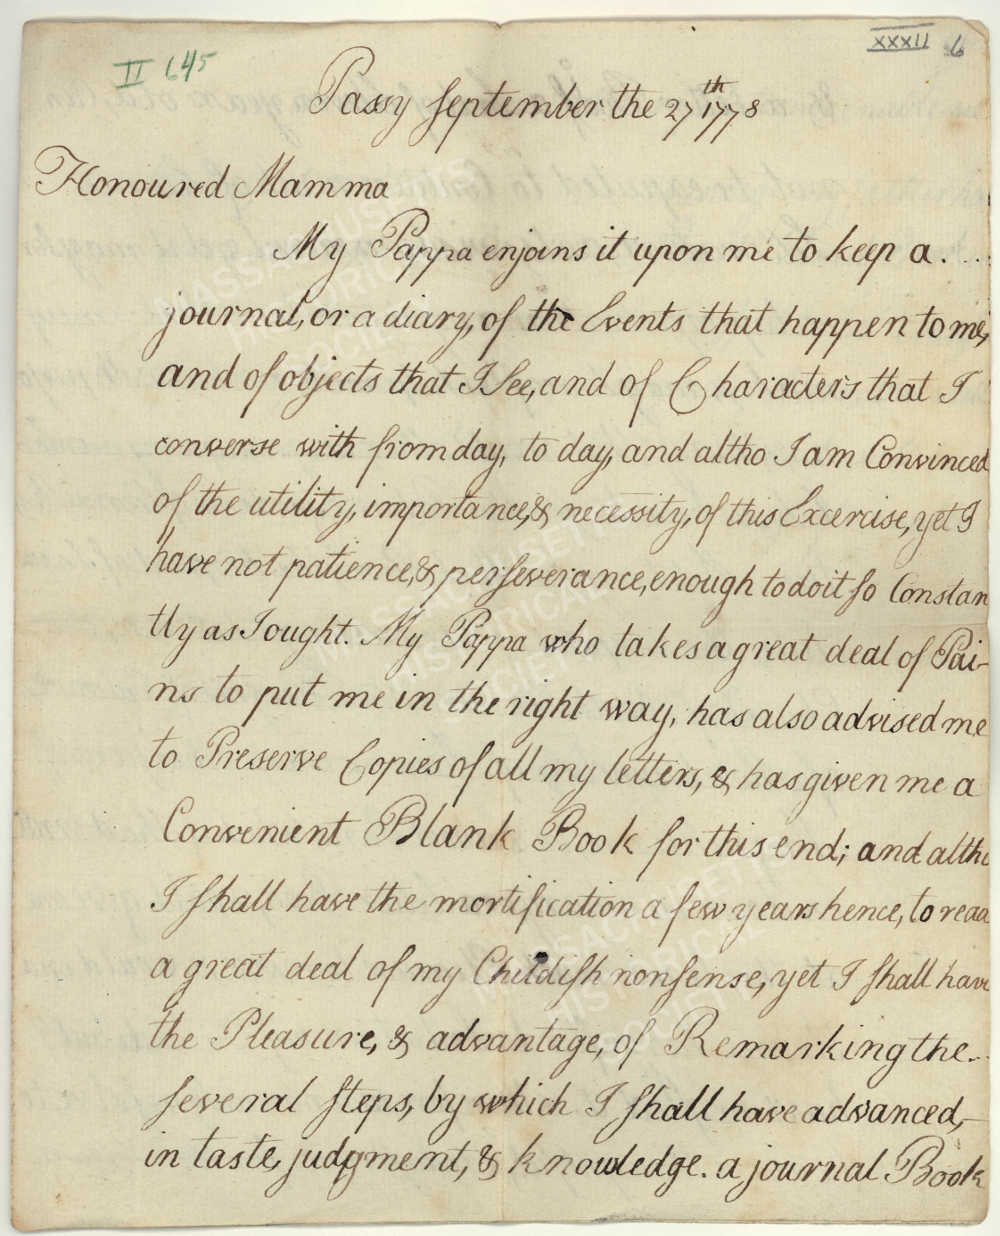 Letter from John Quincy Adams to Abigail Adams, 27 September 1778. Eleven-year-old John Quincy Adams wrote this letter to his mother from Passy, France, where he accompanied his father on a diplomatic mission. The young Adams described his resolution to keep a diary and to retain copies of letters, practices he would maintain the rest of his life. Image courtesy of the Massachusetts Historical Society.